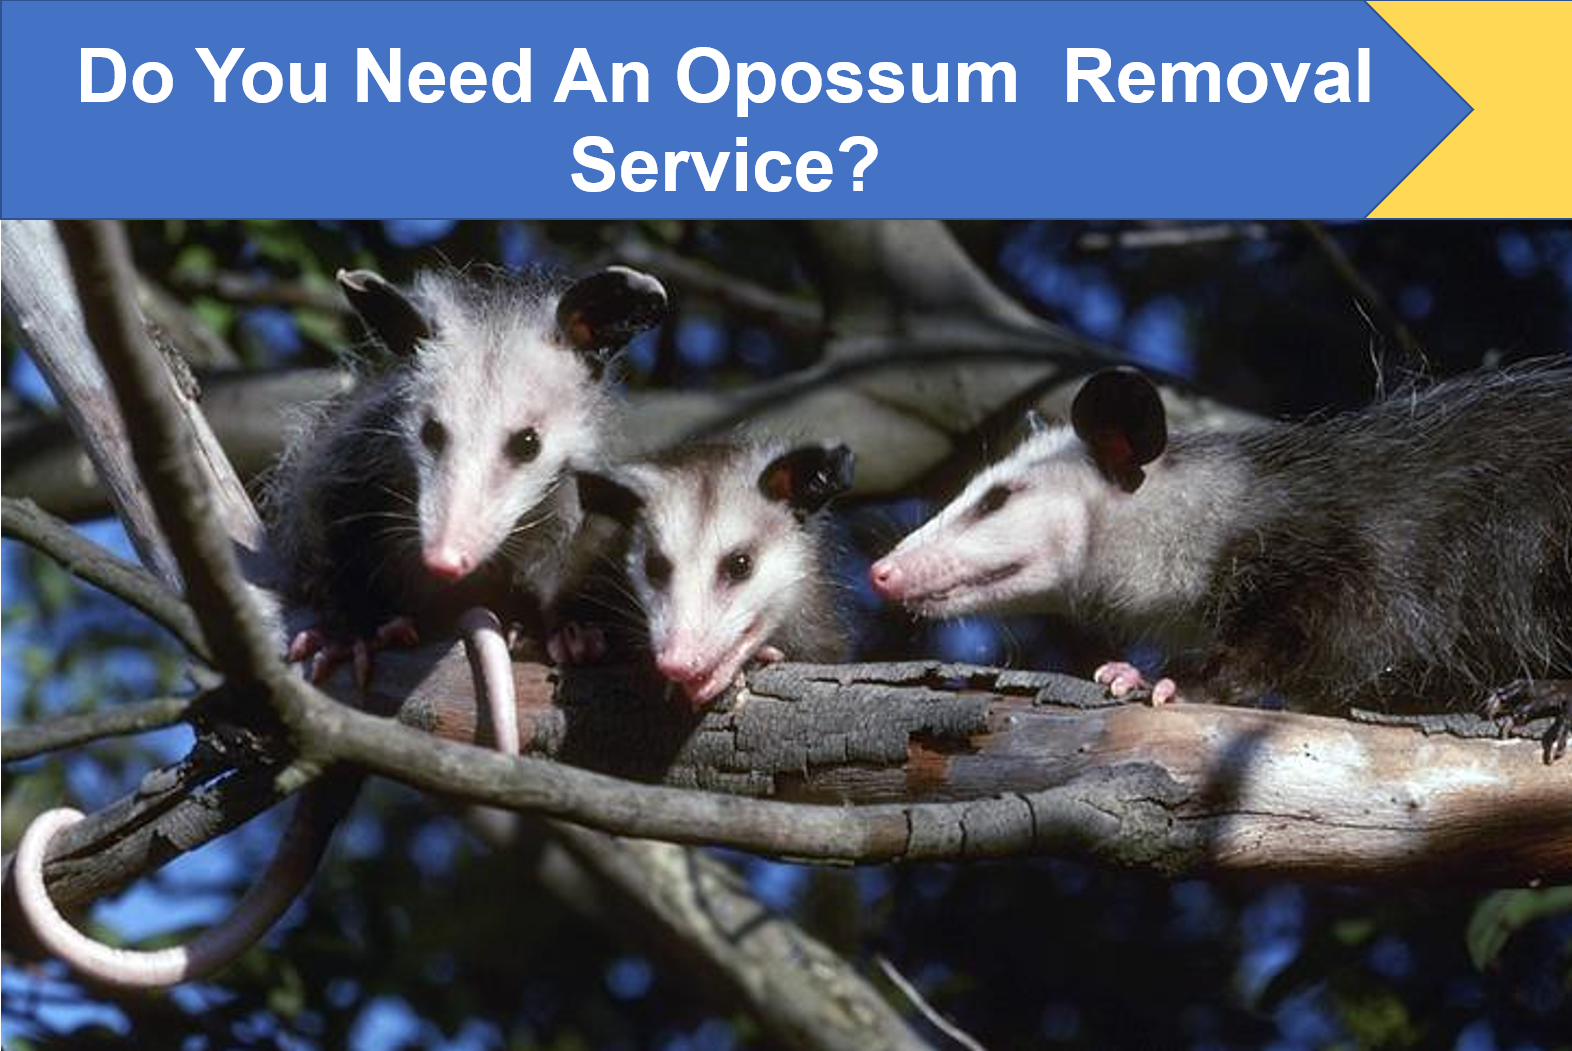 Do You Need an Opossum Removal Service? | Critter Stop